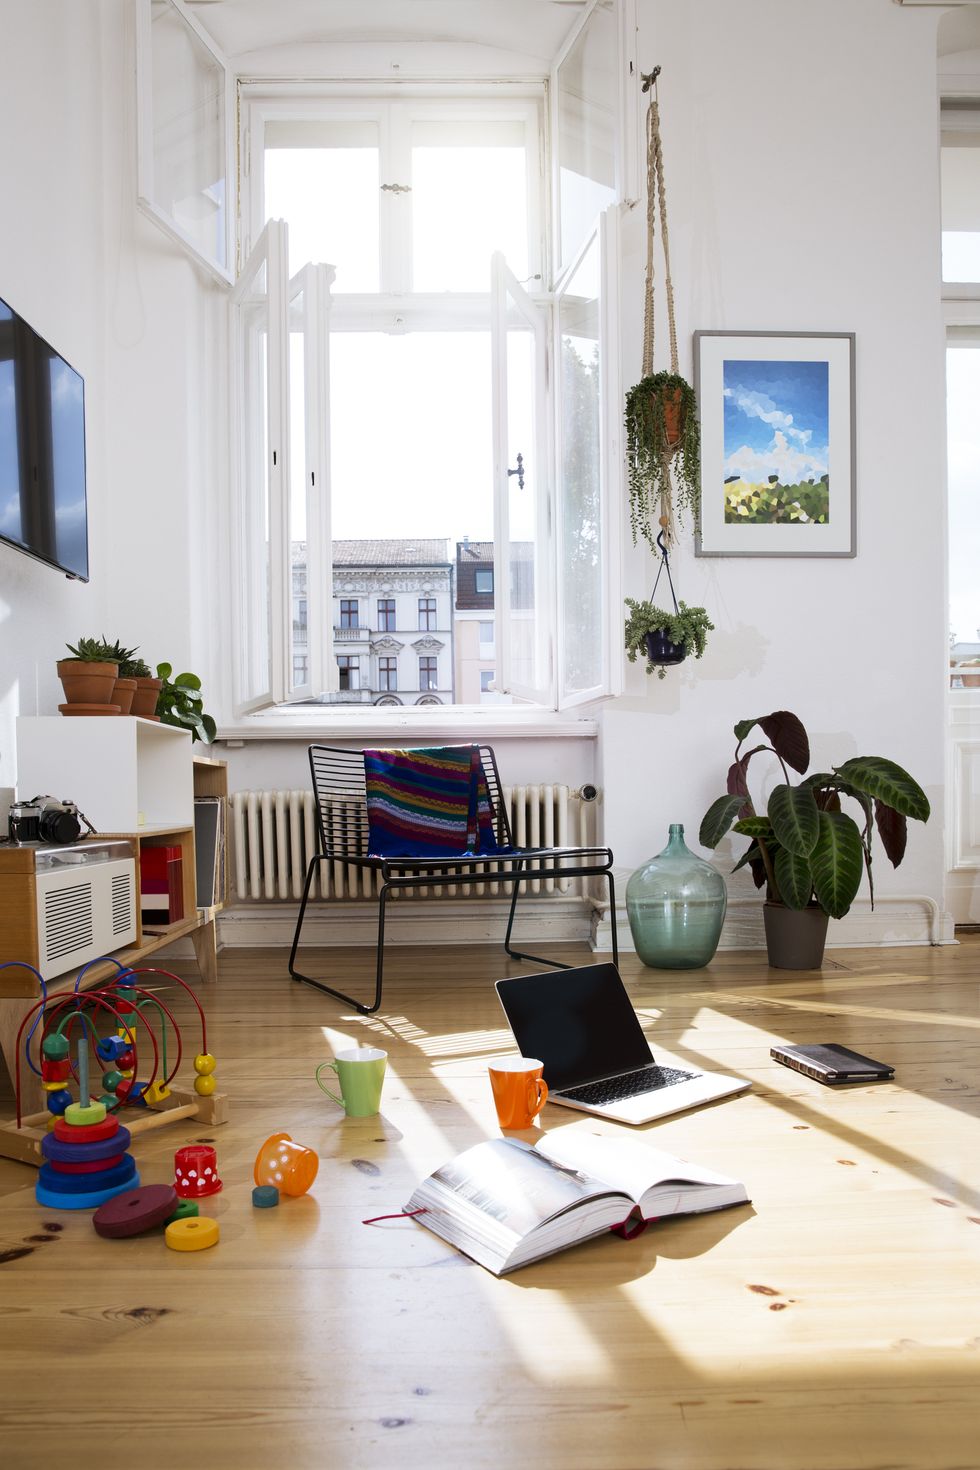 Apartment with toys and laptop on floor